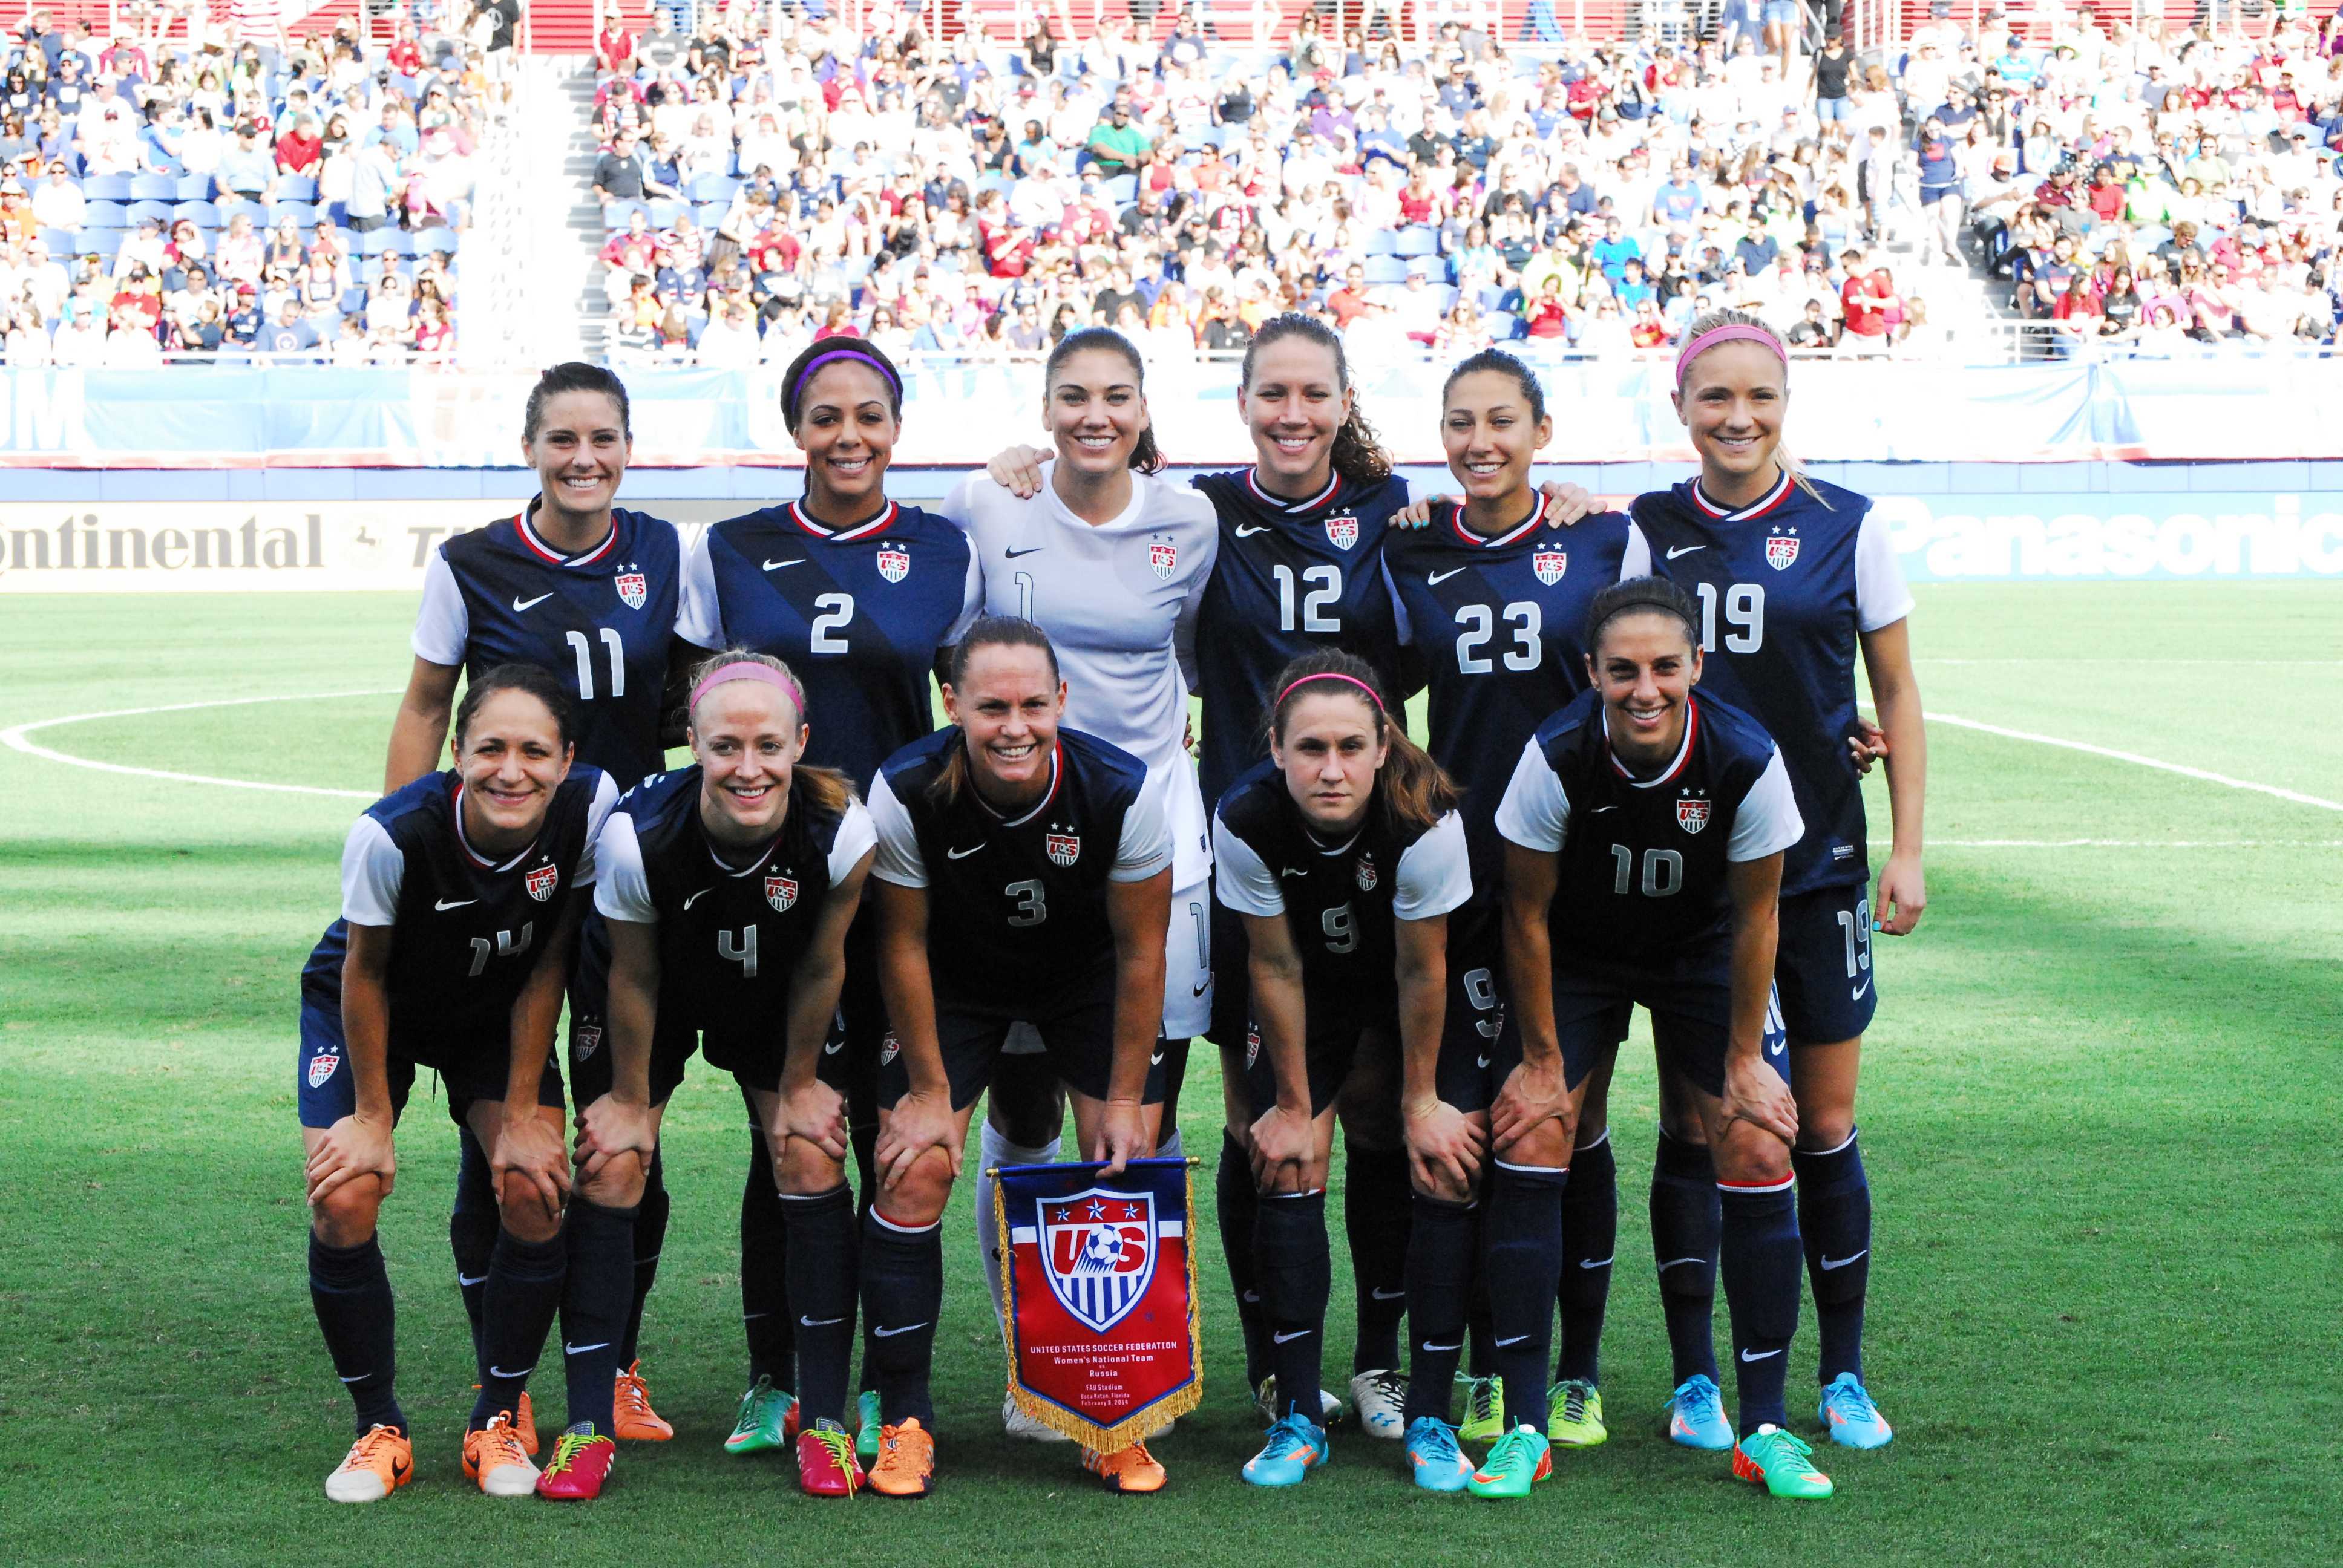 Usa Women S Soccer Beats Russia 7 0 Matches Largest Margin Of Victory Over European Team University Press